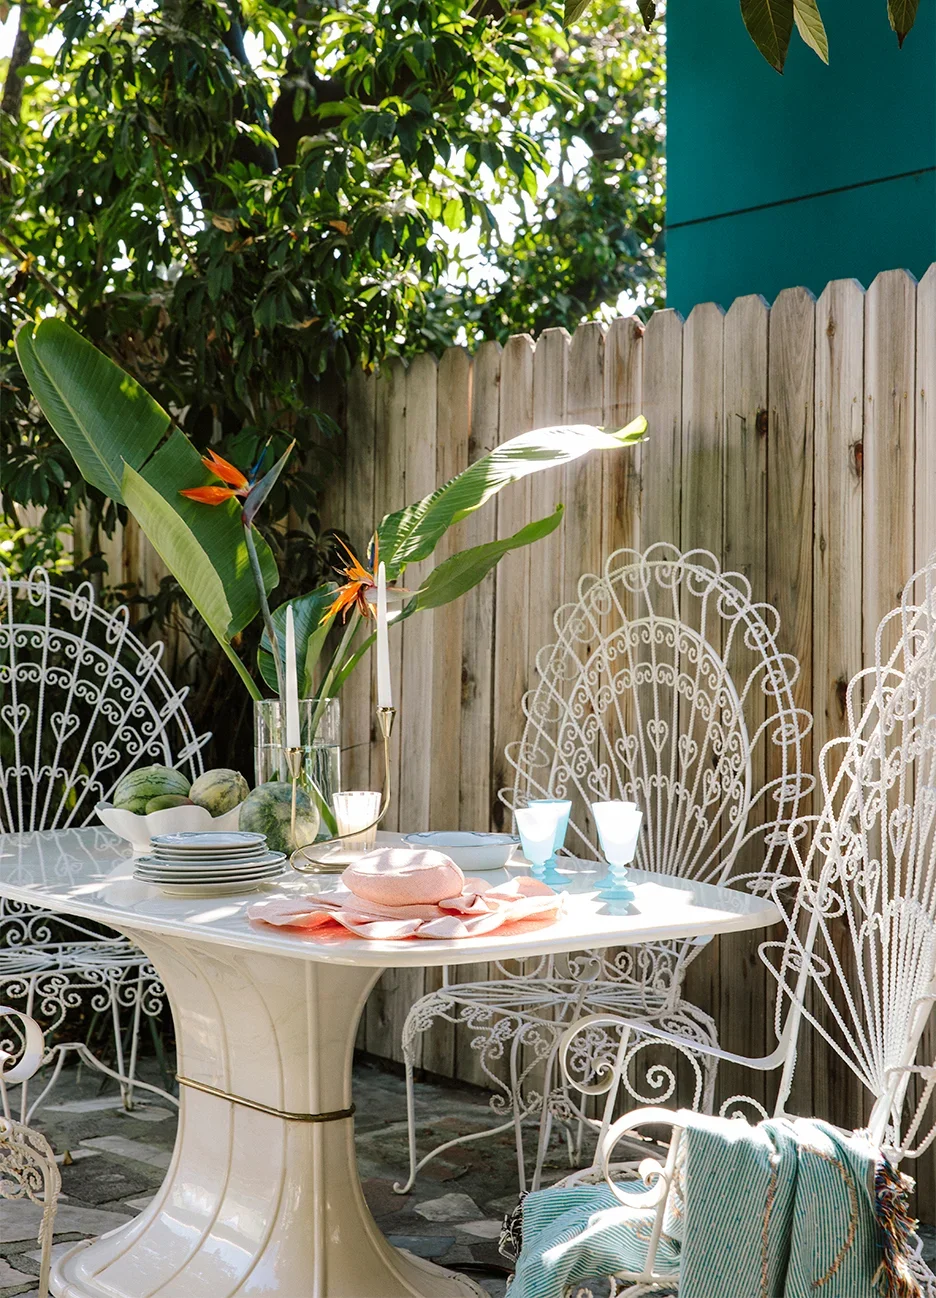 White patio furniture and vintage table in fenced backyard with clippings of Bird of Paradise